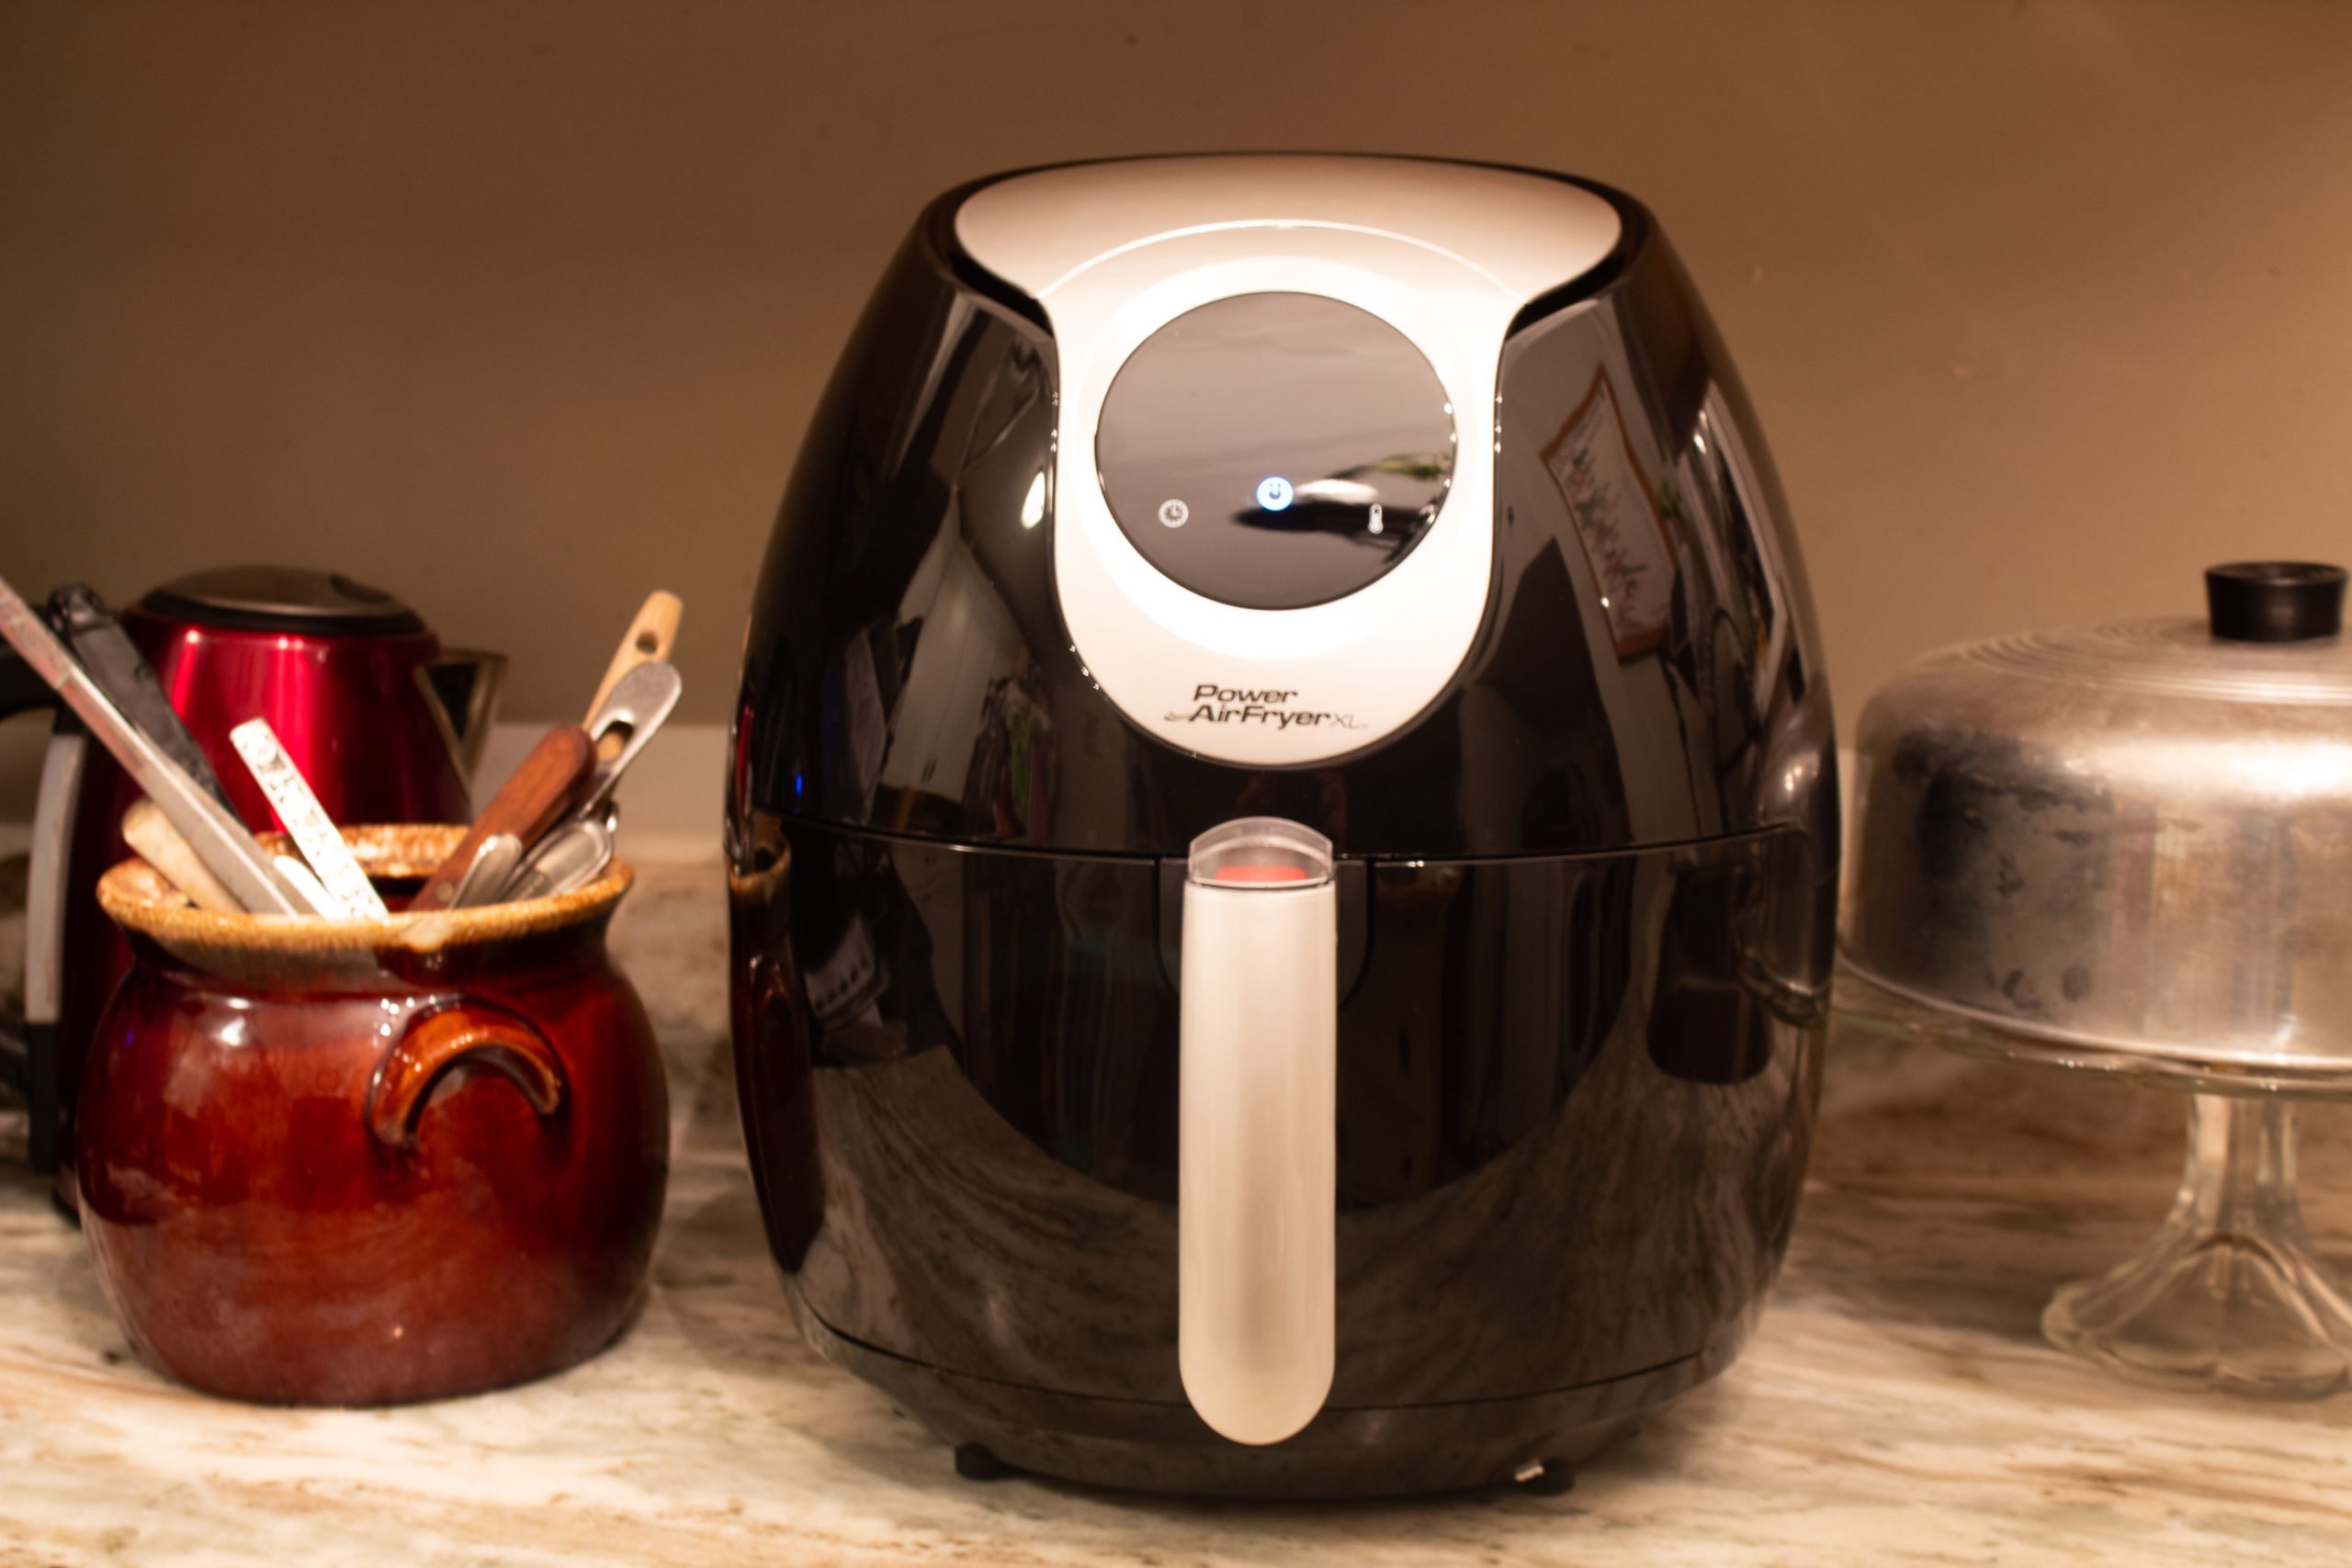 https://tastylicious.com/wp-content/uploads/2018/05/Power-Air-Fryer-Oven-Look-scaled.jpg